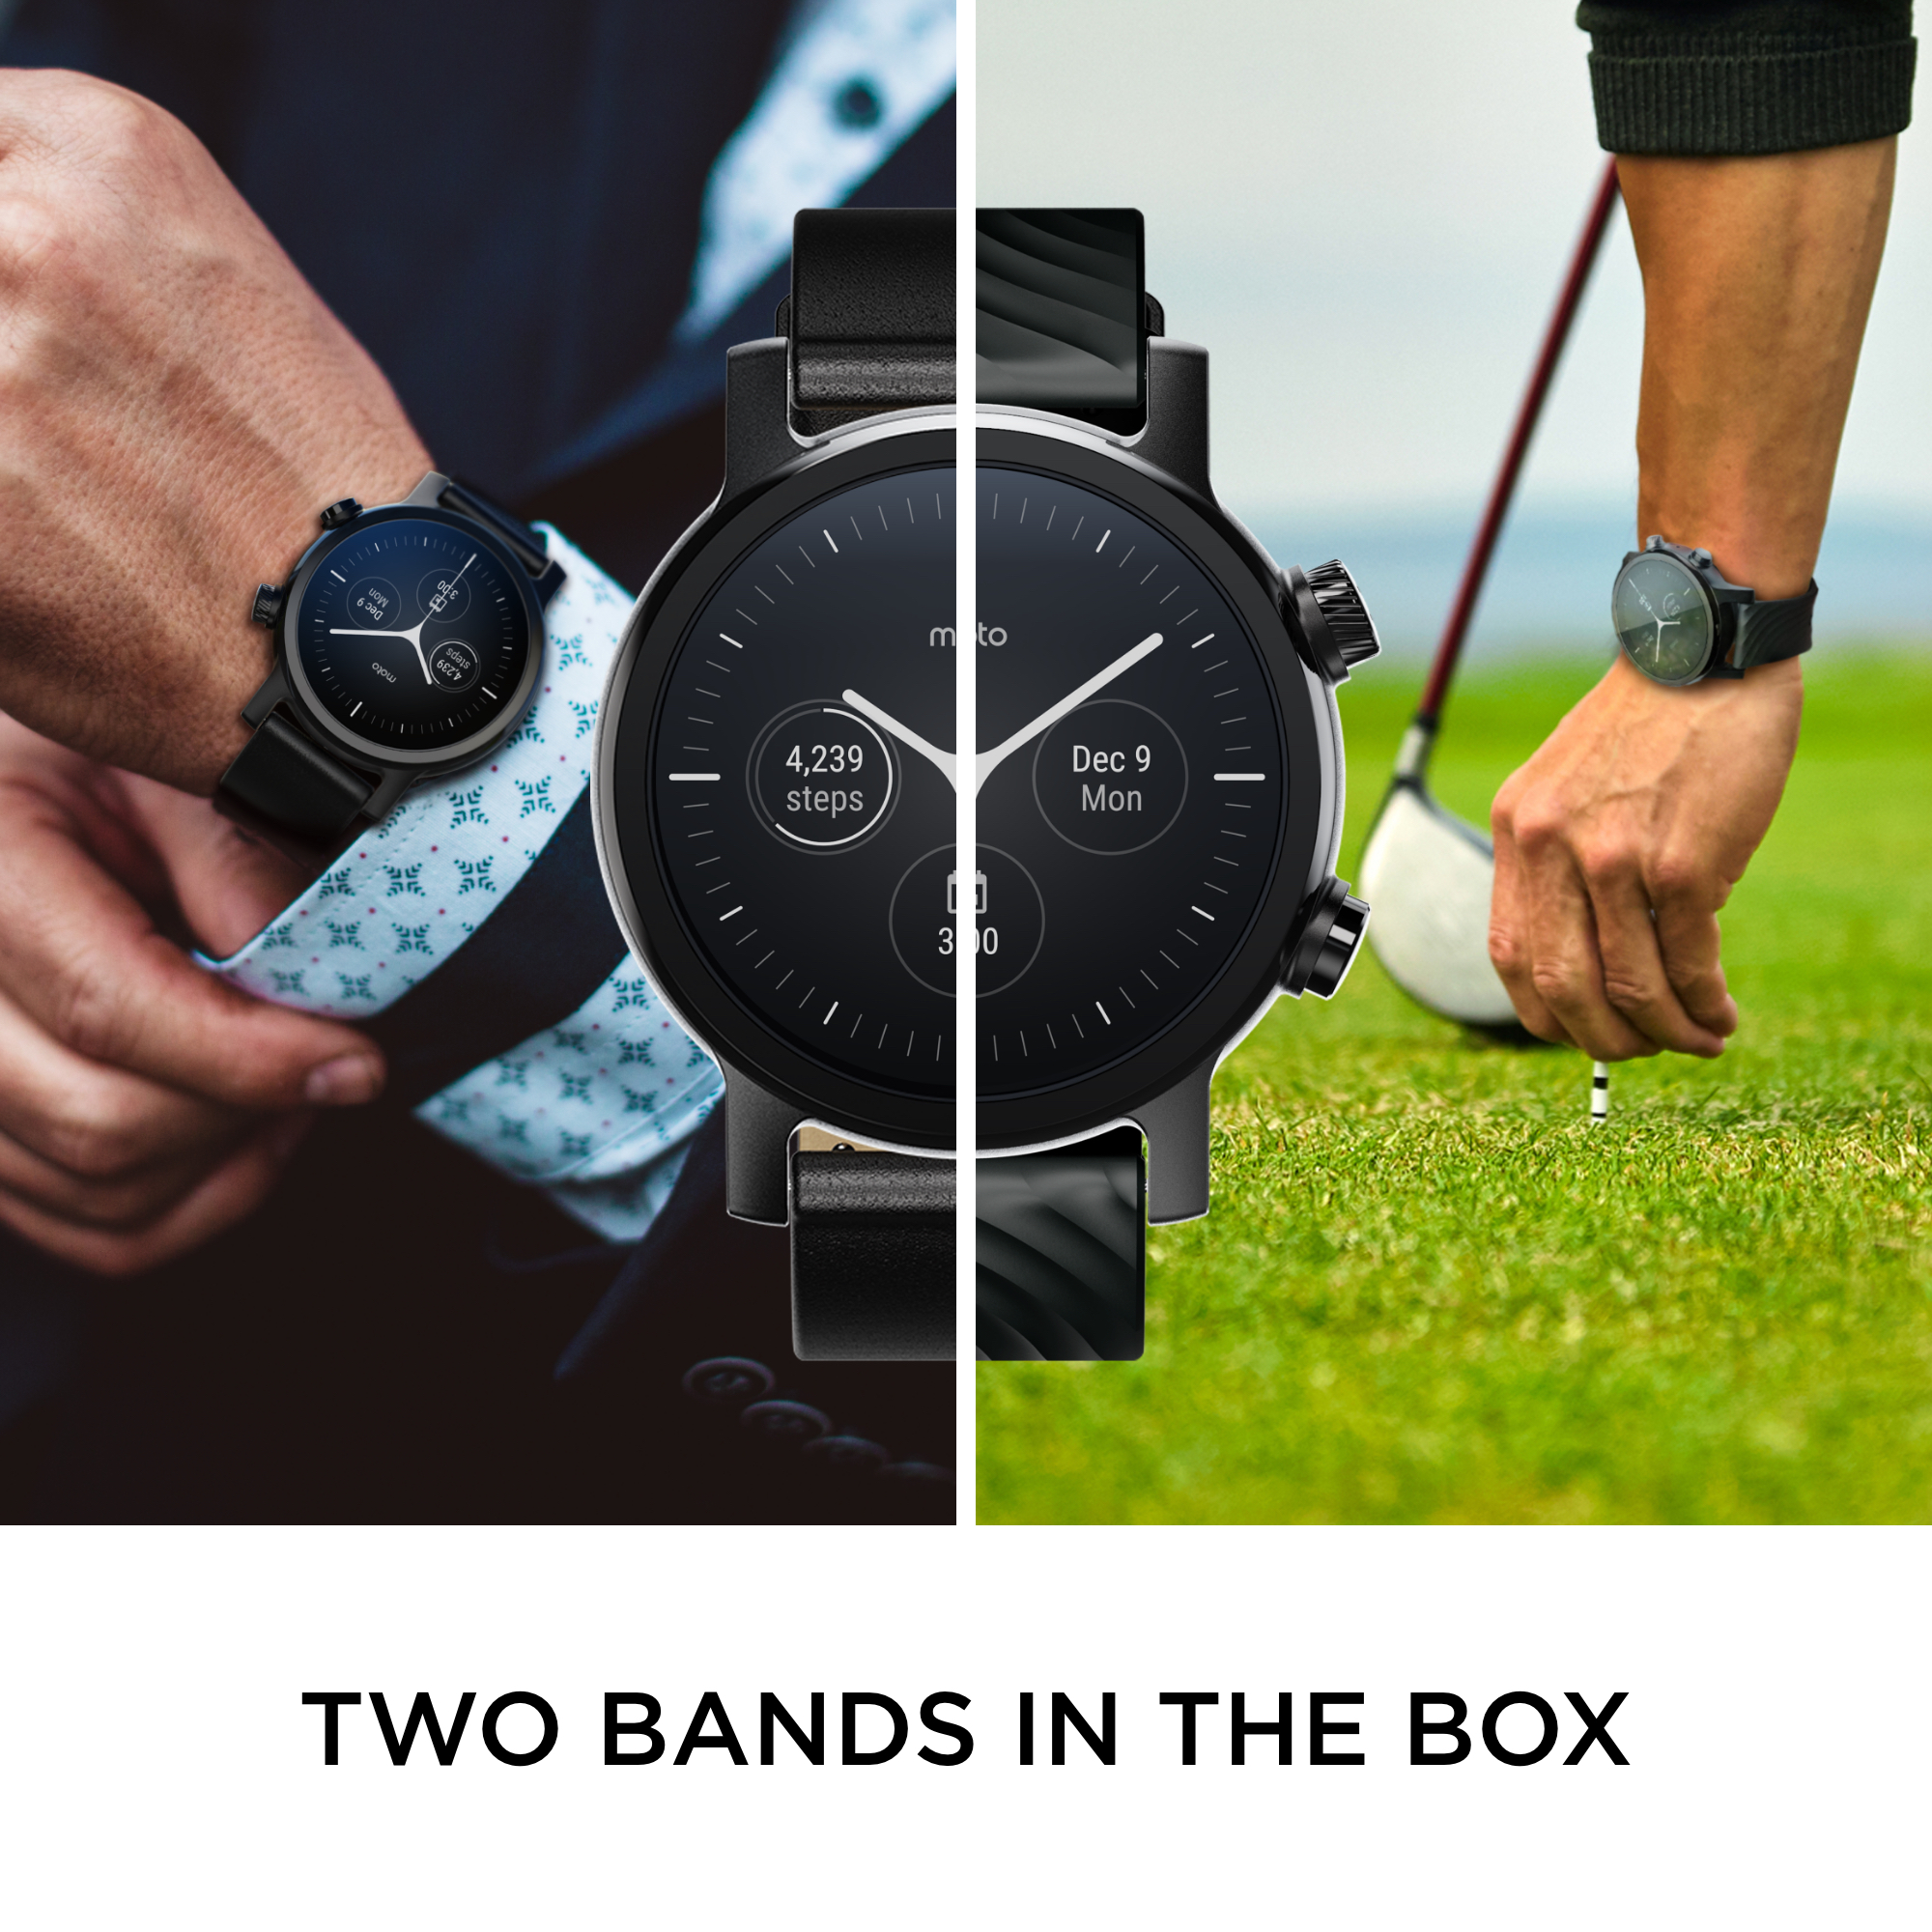 Moto 360 3rd Gen 2020 - Wear OS by Google - The Luxury Stainless Steel Smartwatch with Included Genuine Leather and High-Impact Sports Bands - Phantom Black - image 3 of 7